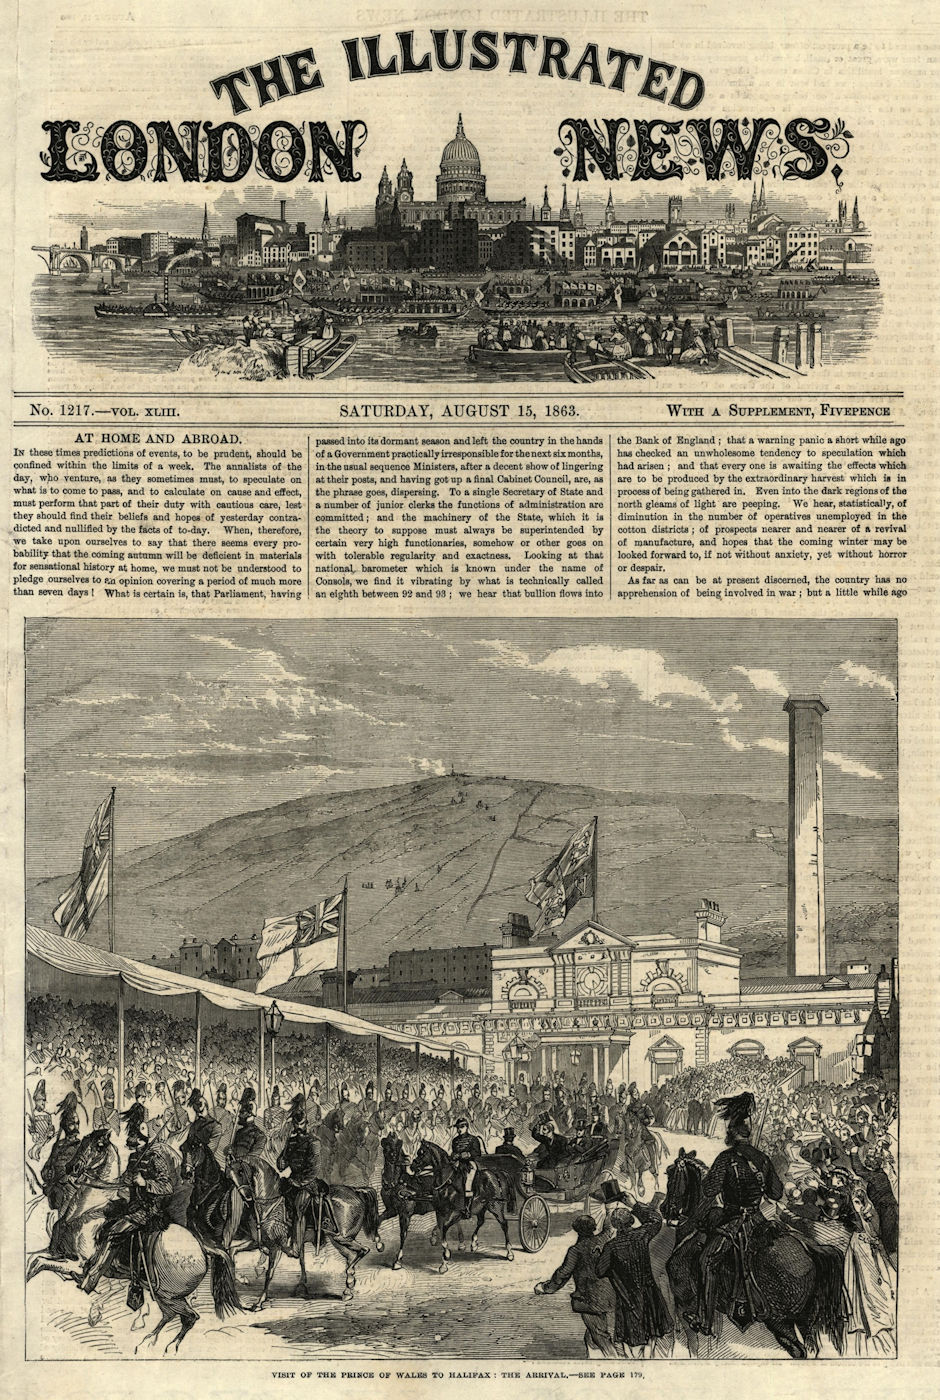 Prince of Wales (later Edward VII) visit to Halifax: The arrival. Yorkshire 1863